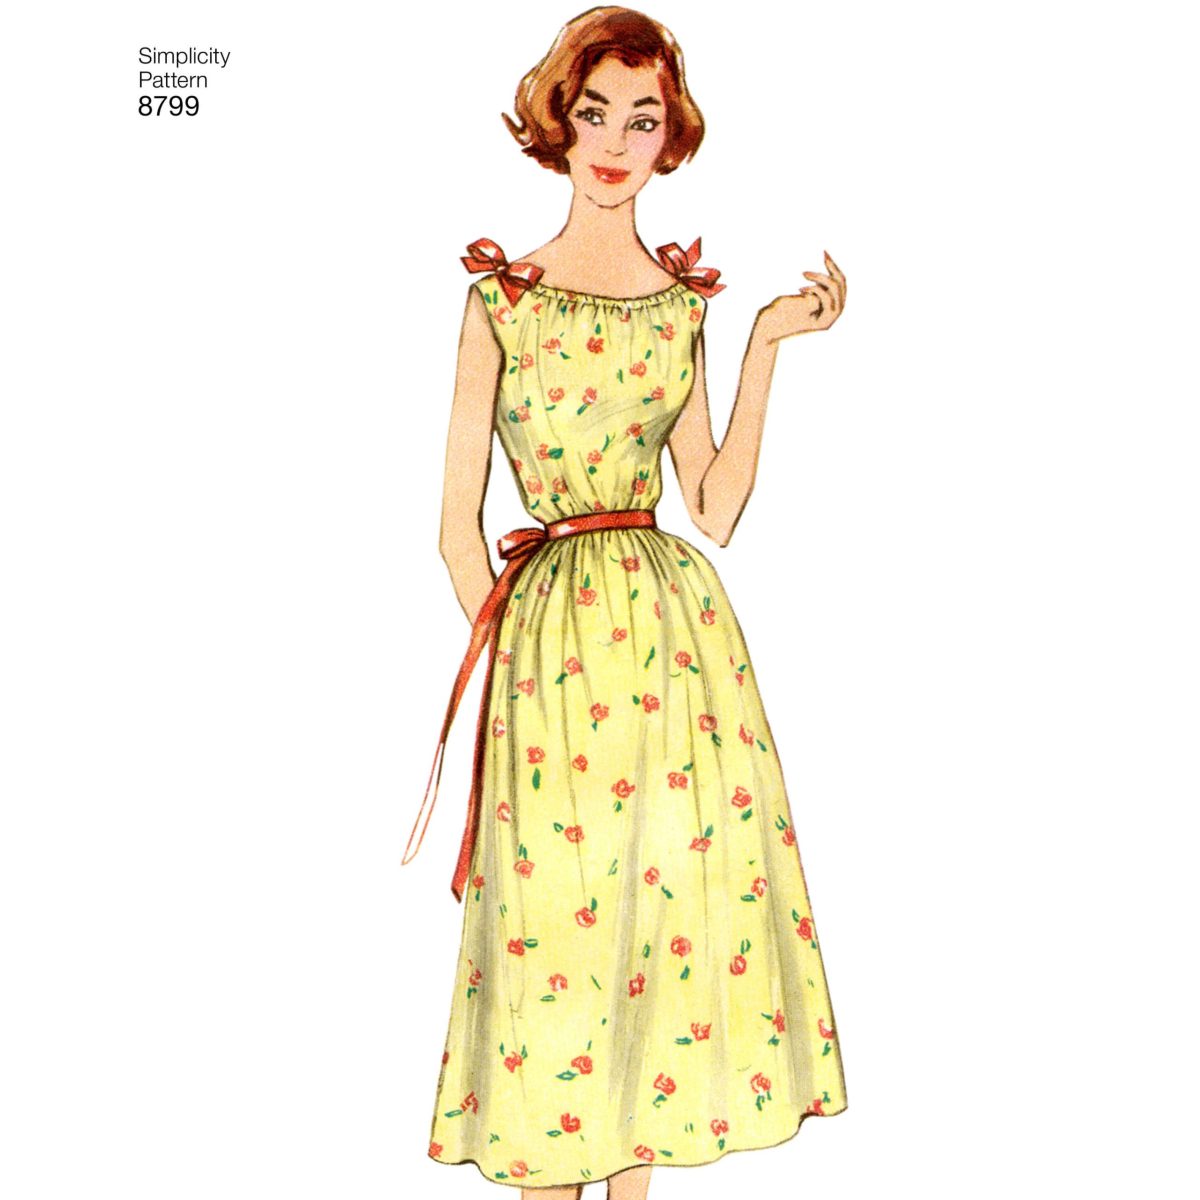 Simplicity Sewing Pattern 8799 Misses' Vintage Nightgowns